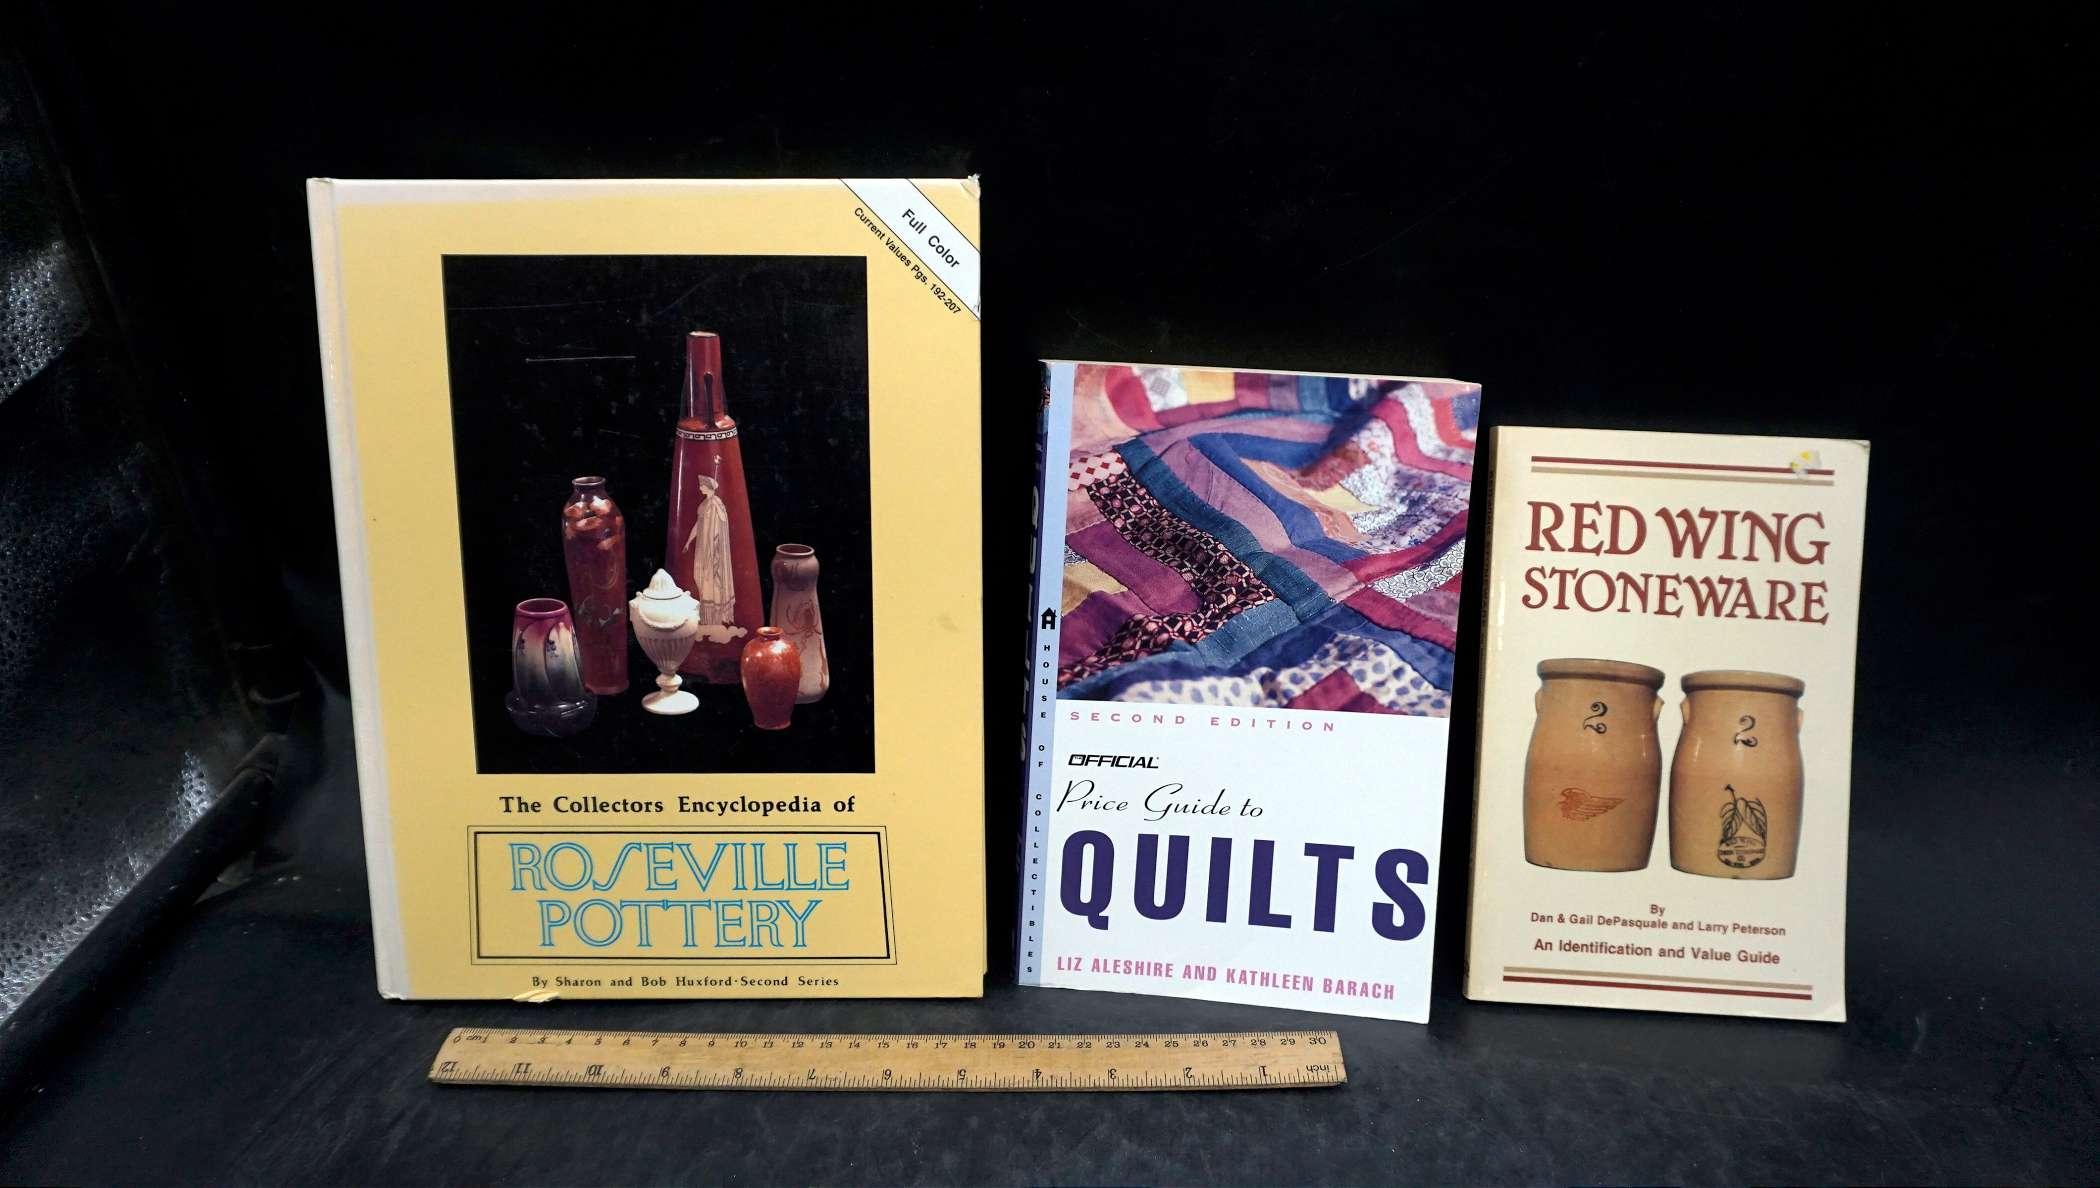 3 Books - Roseville Pottery, Quilts & Red Wing Stoneware